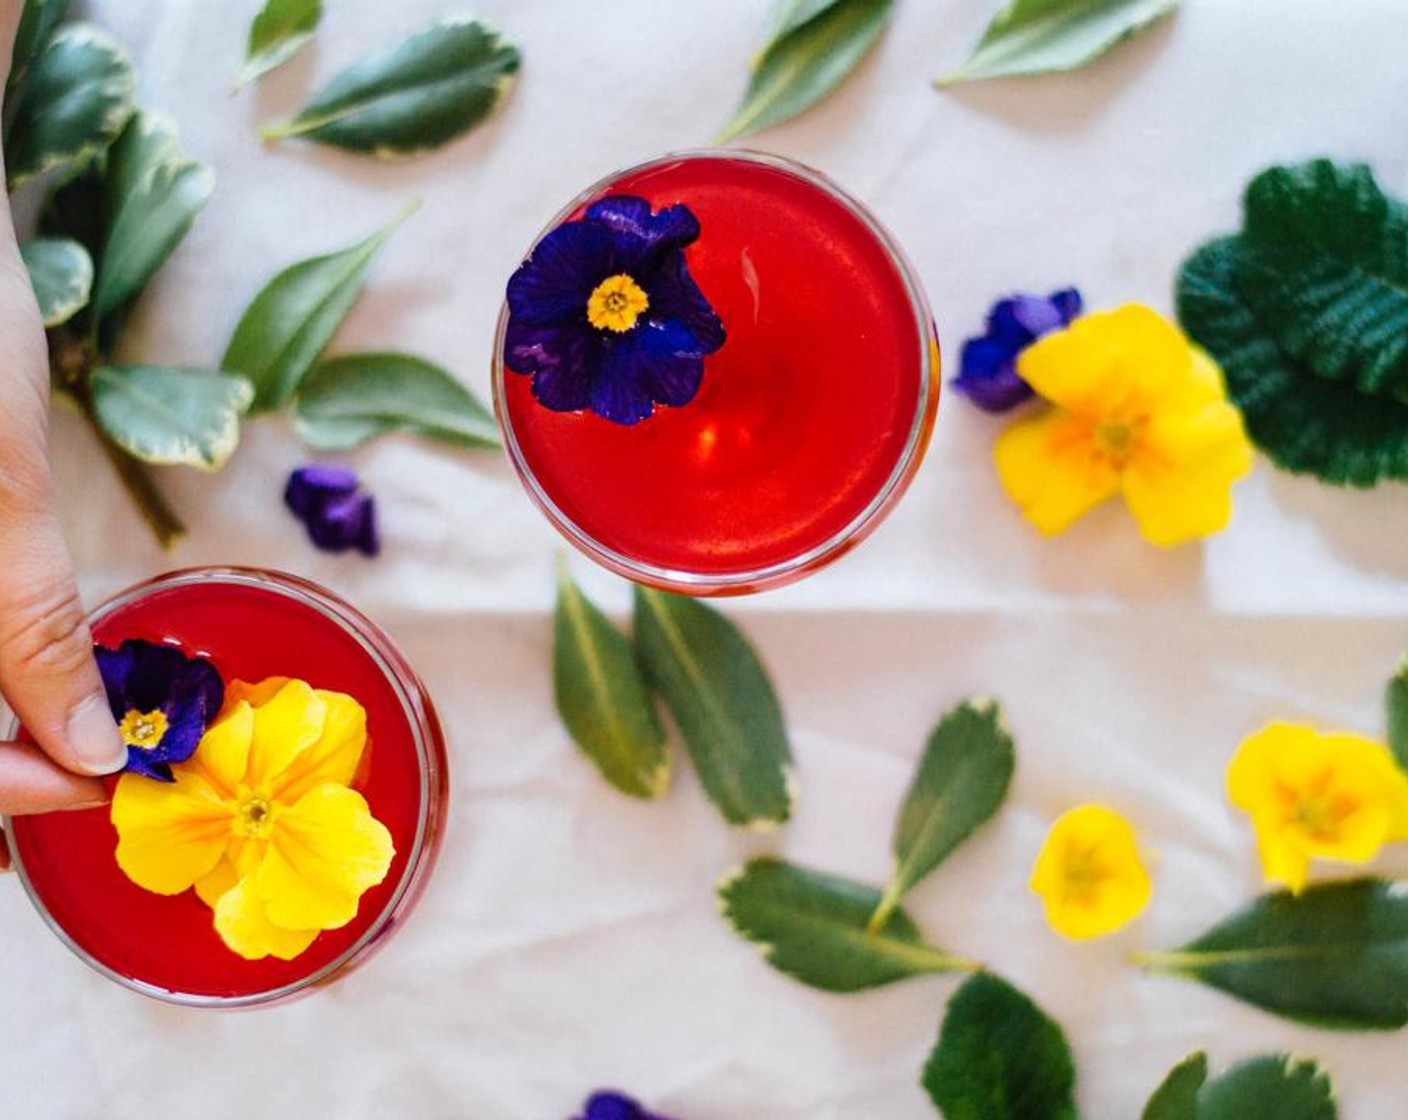 step 2 Add Ice (to taste) and stir until the mixture is chilled. Strain into your glass and garnish with Primrose Edible Flowers (to taste).